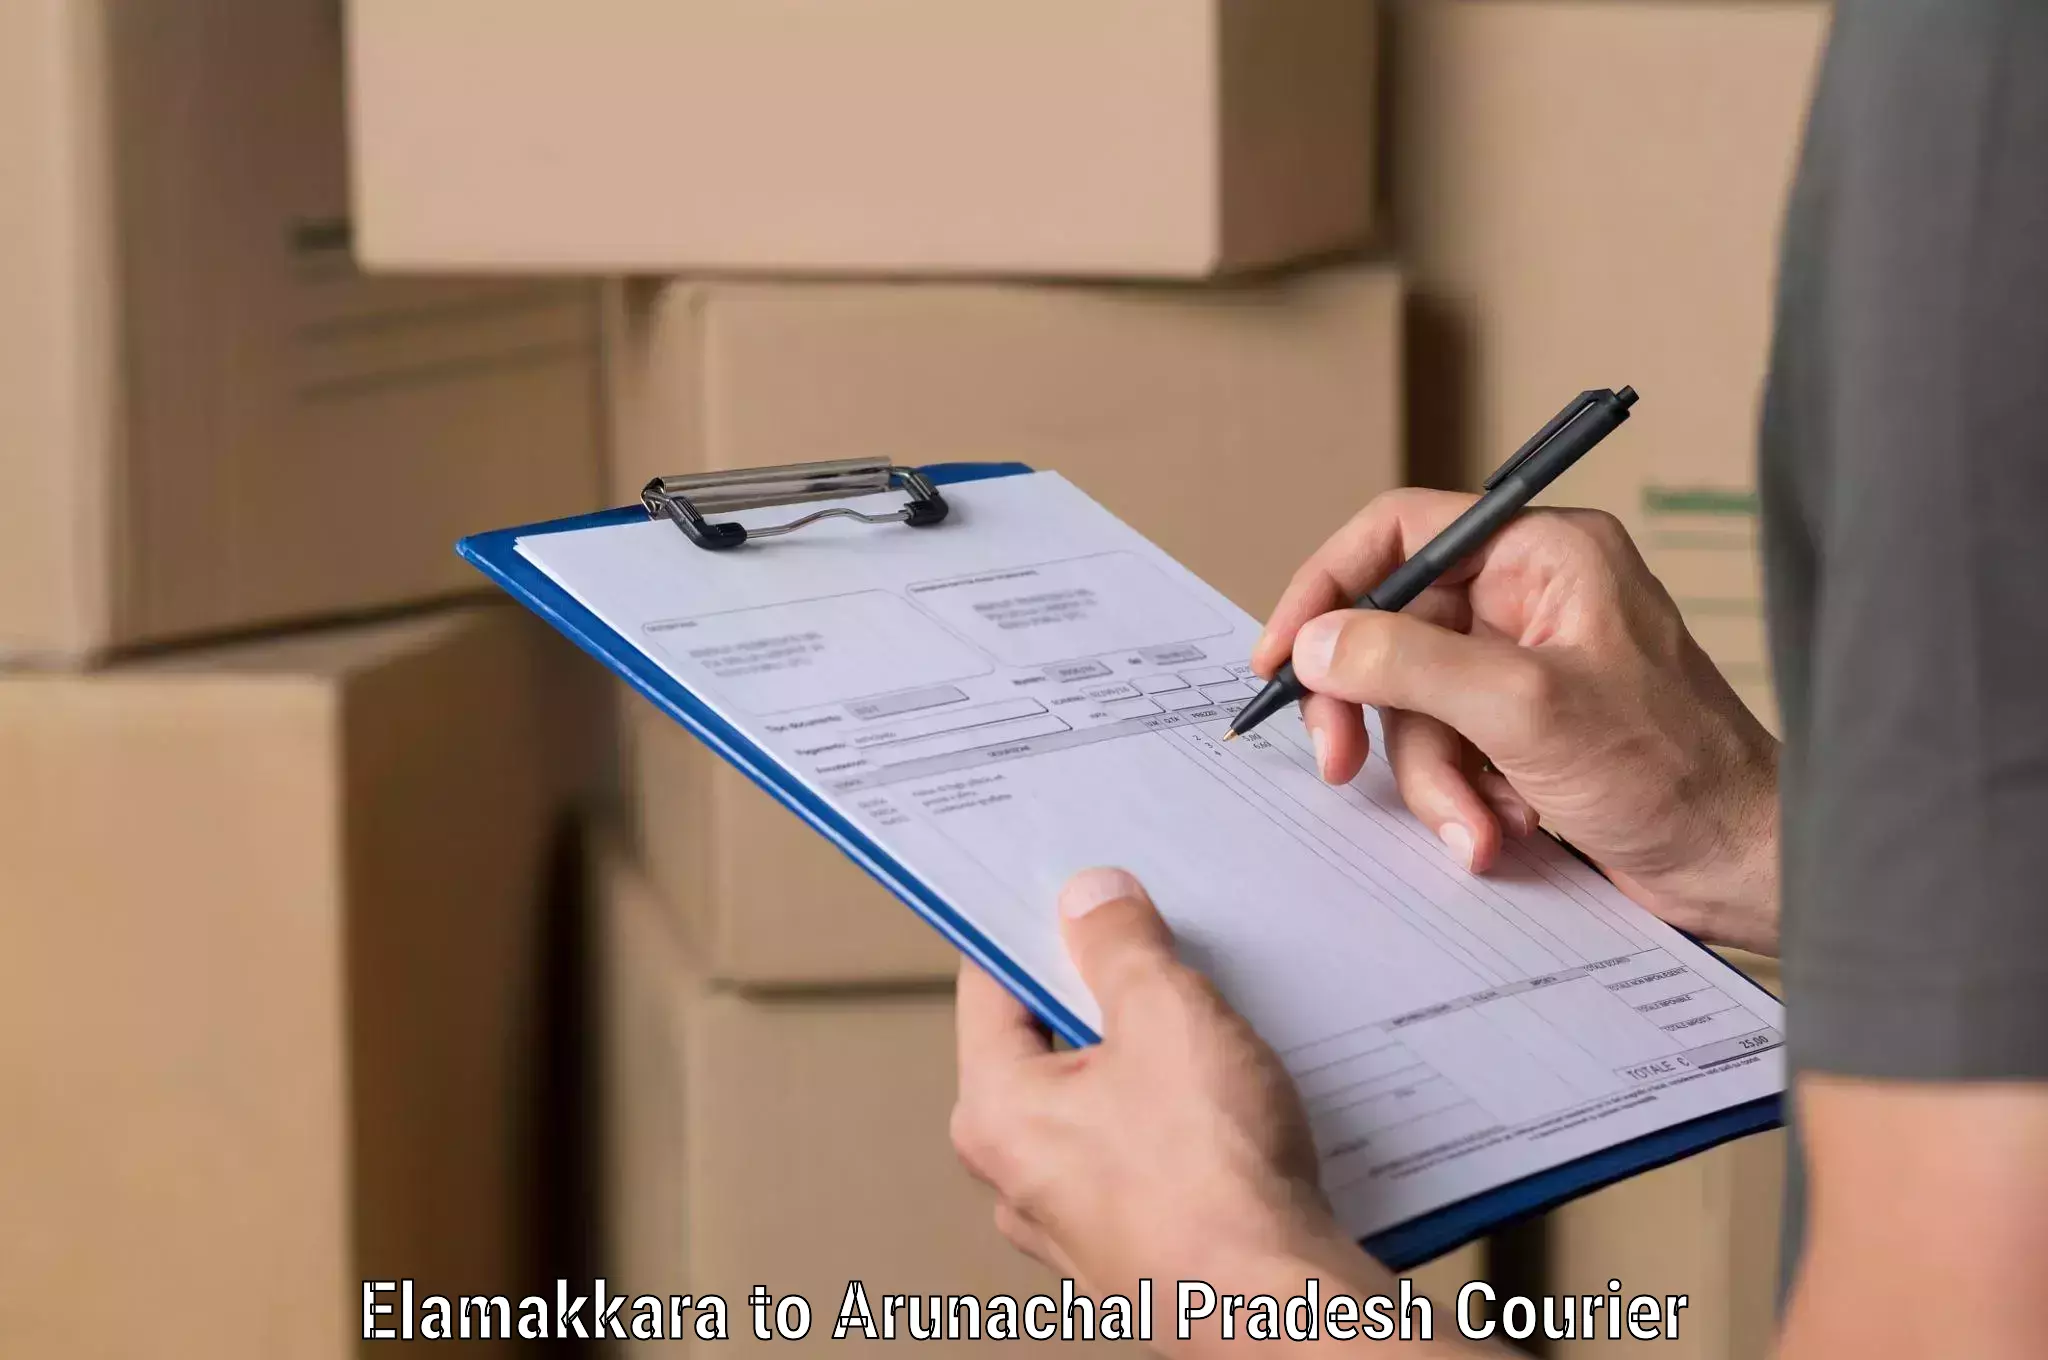 Next-day delivery options in Elamakkara to Dirang